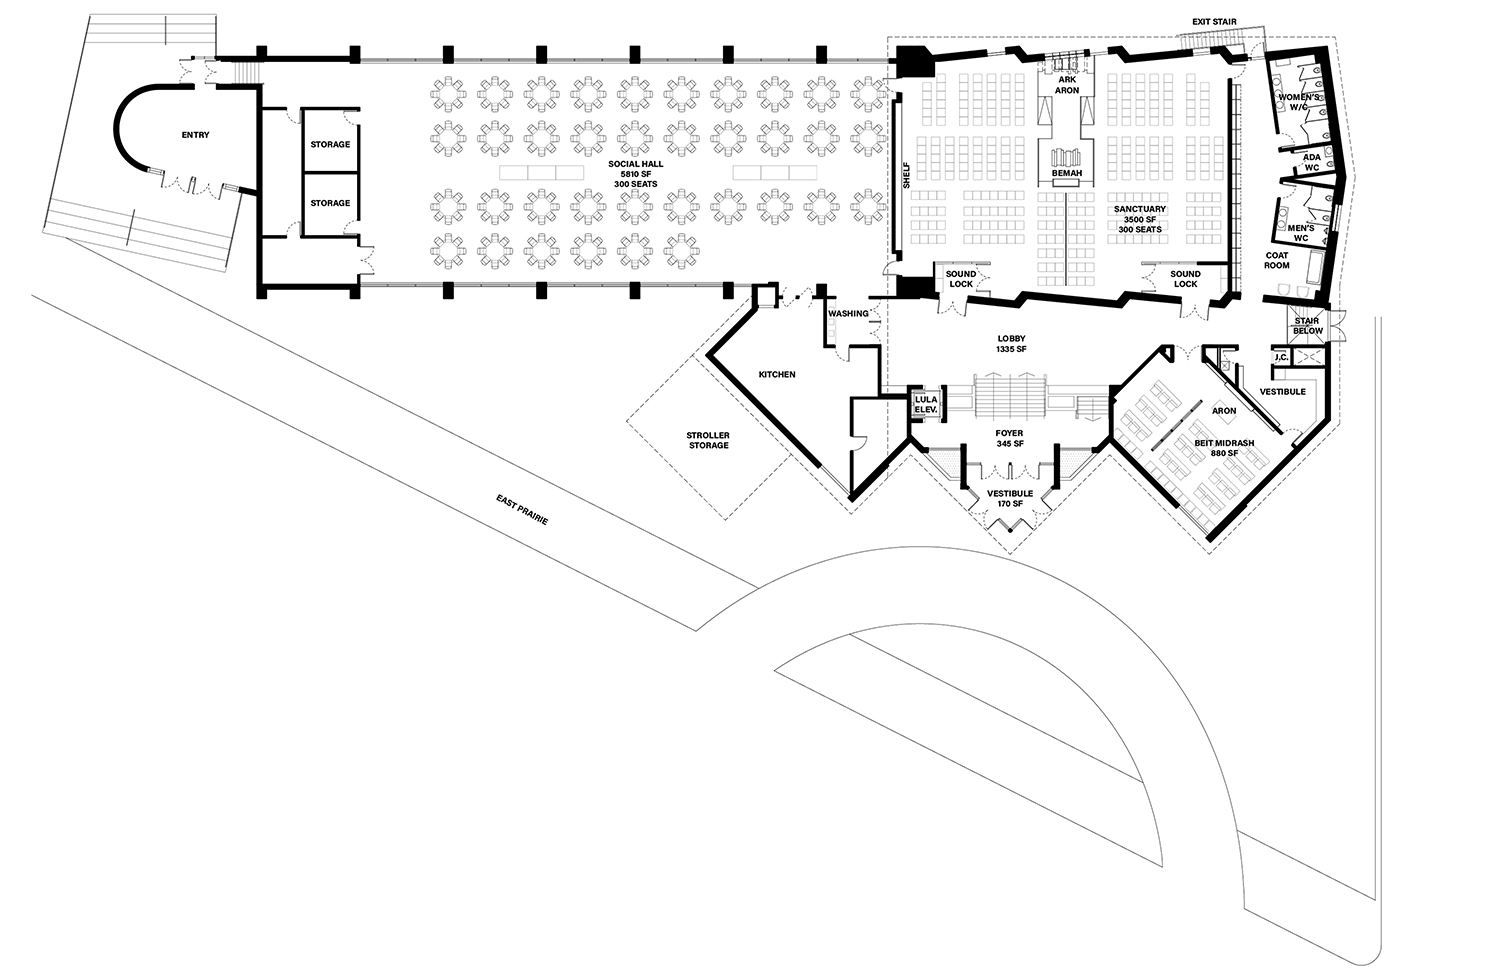 Floor Plan for Skokie Valley Synagogue. Rendering by Studio ST Architects